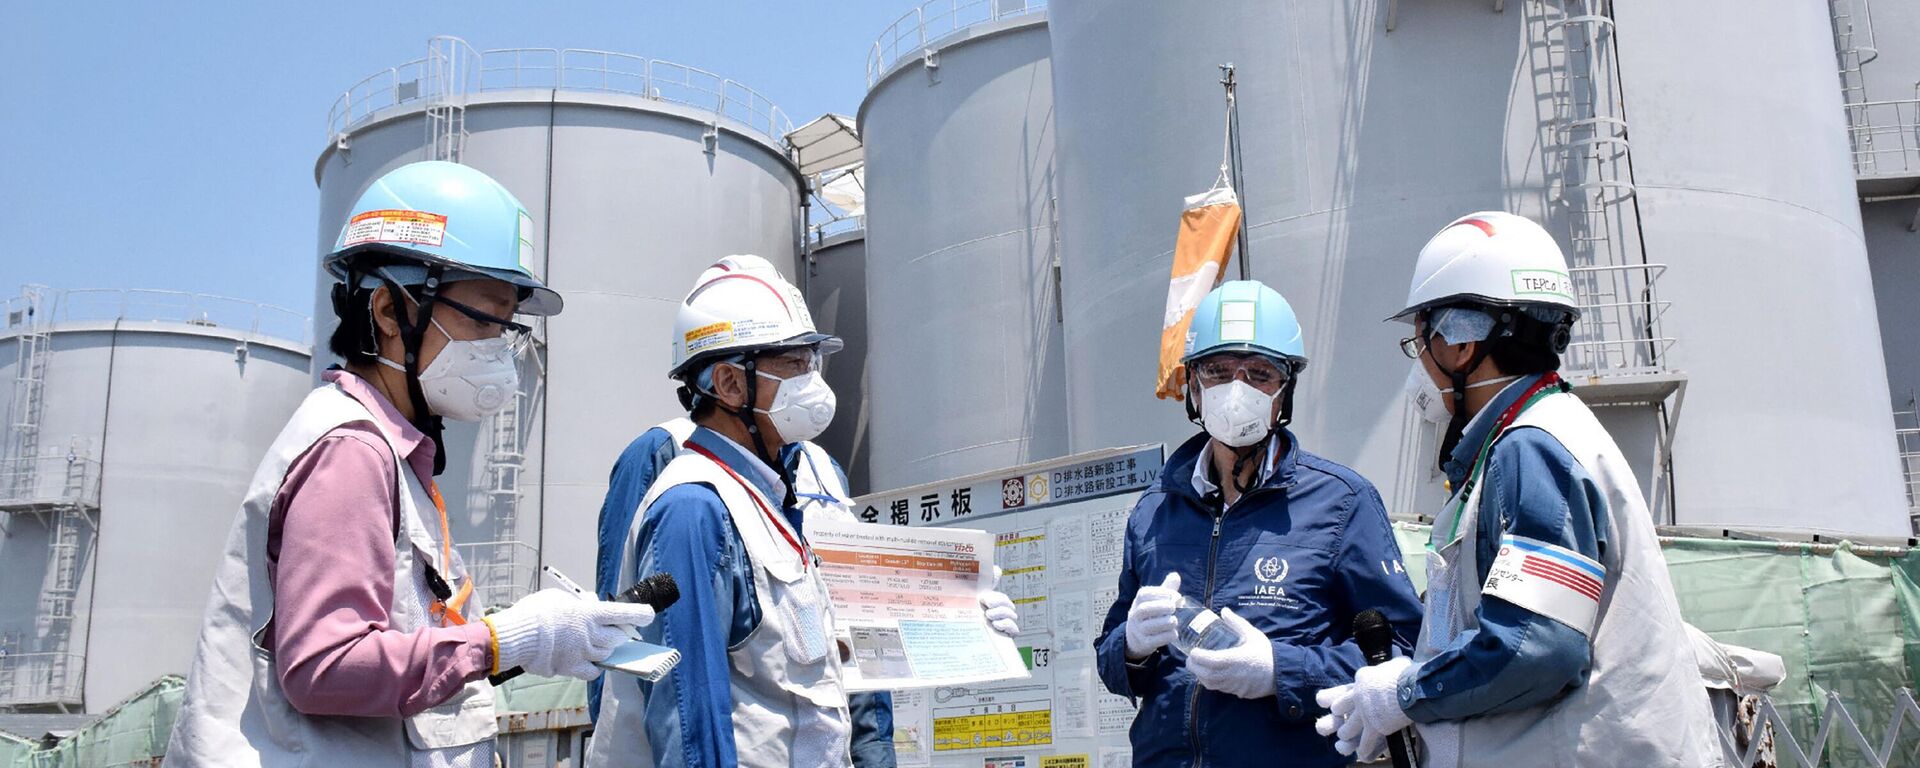 Director General of the International Atomic Energy Agency (IAEA) Rafael Grossi (2nd-R) stands in front of the storage tanks for radioactive water as he visits the Tokyo Electric Power Company Holdings (TEPCO) Fukushima Daiichi nuclear power plant in Okuma, Fukushima prefecture on May 19, 2022. - Sputnik International, 1920, 22.07.2022